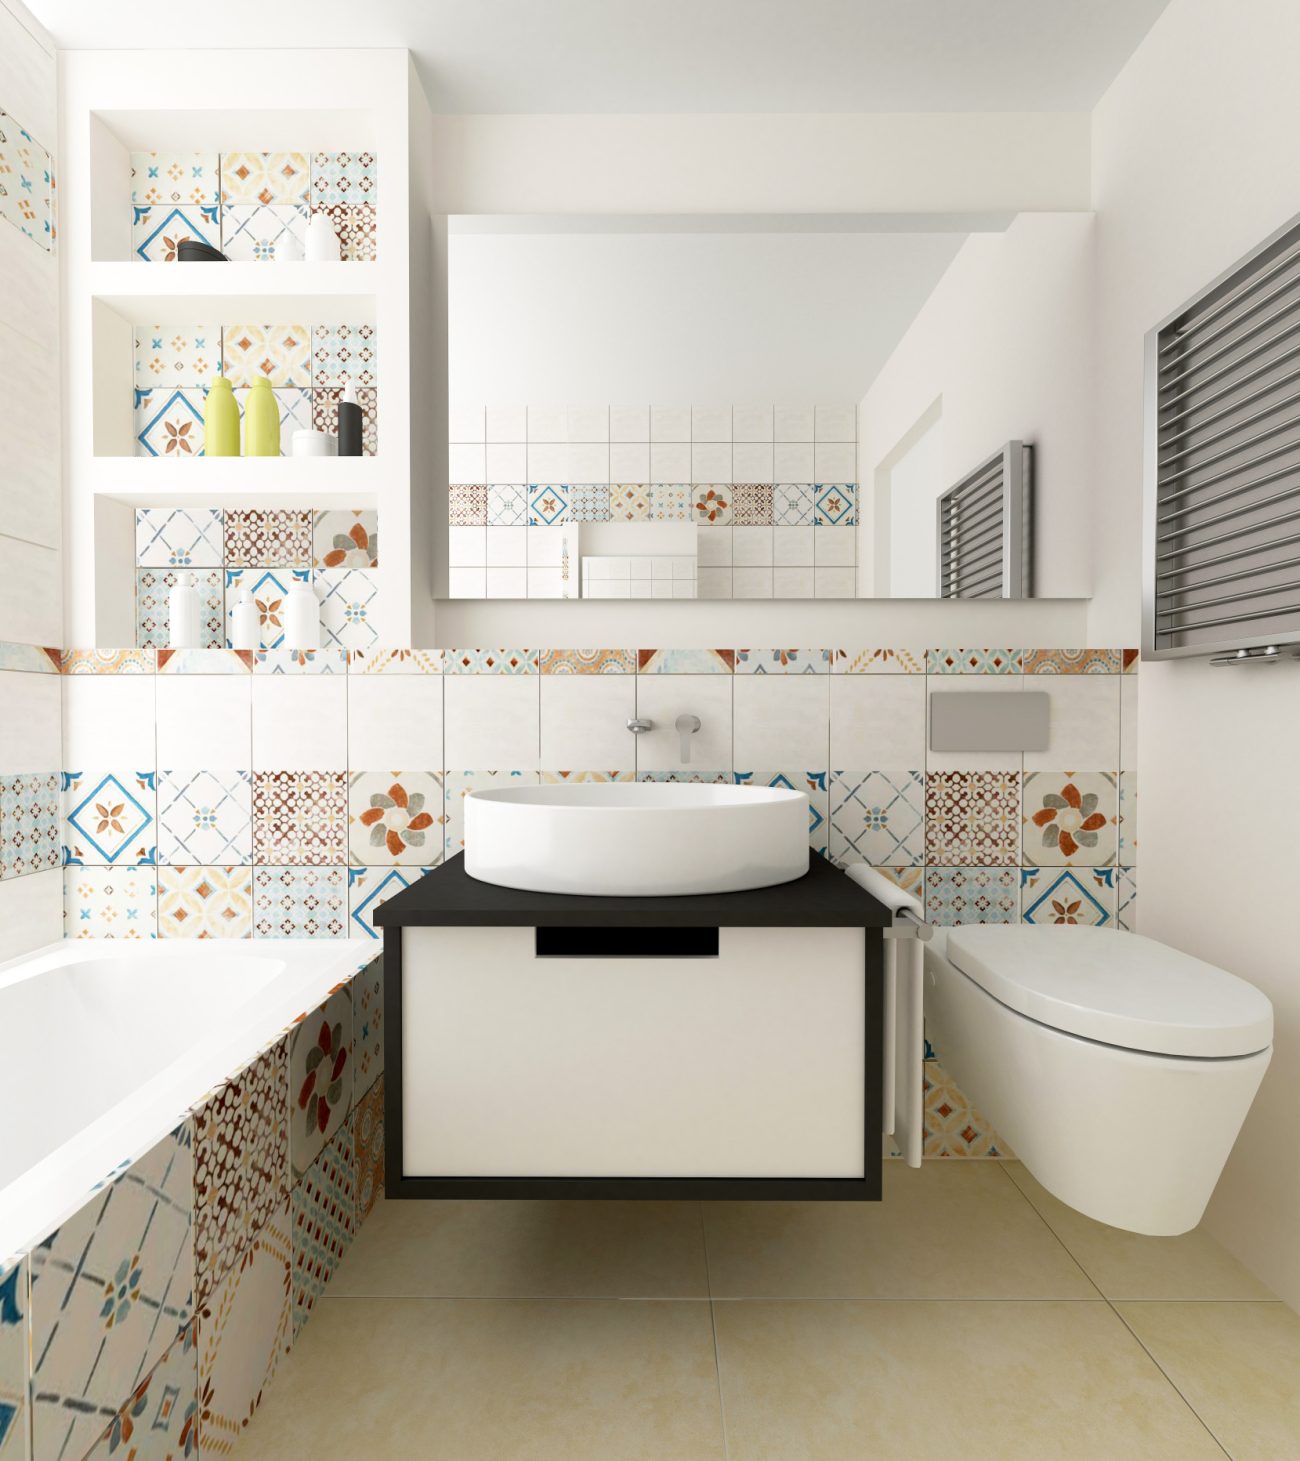 Colorful bathroom design with spanish peel-and-stick tiles, wall-mounted vanity and white vessel sink